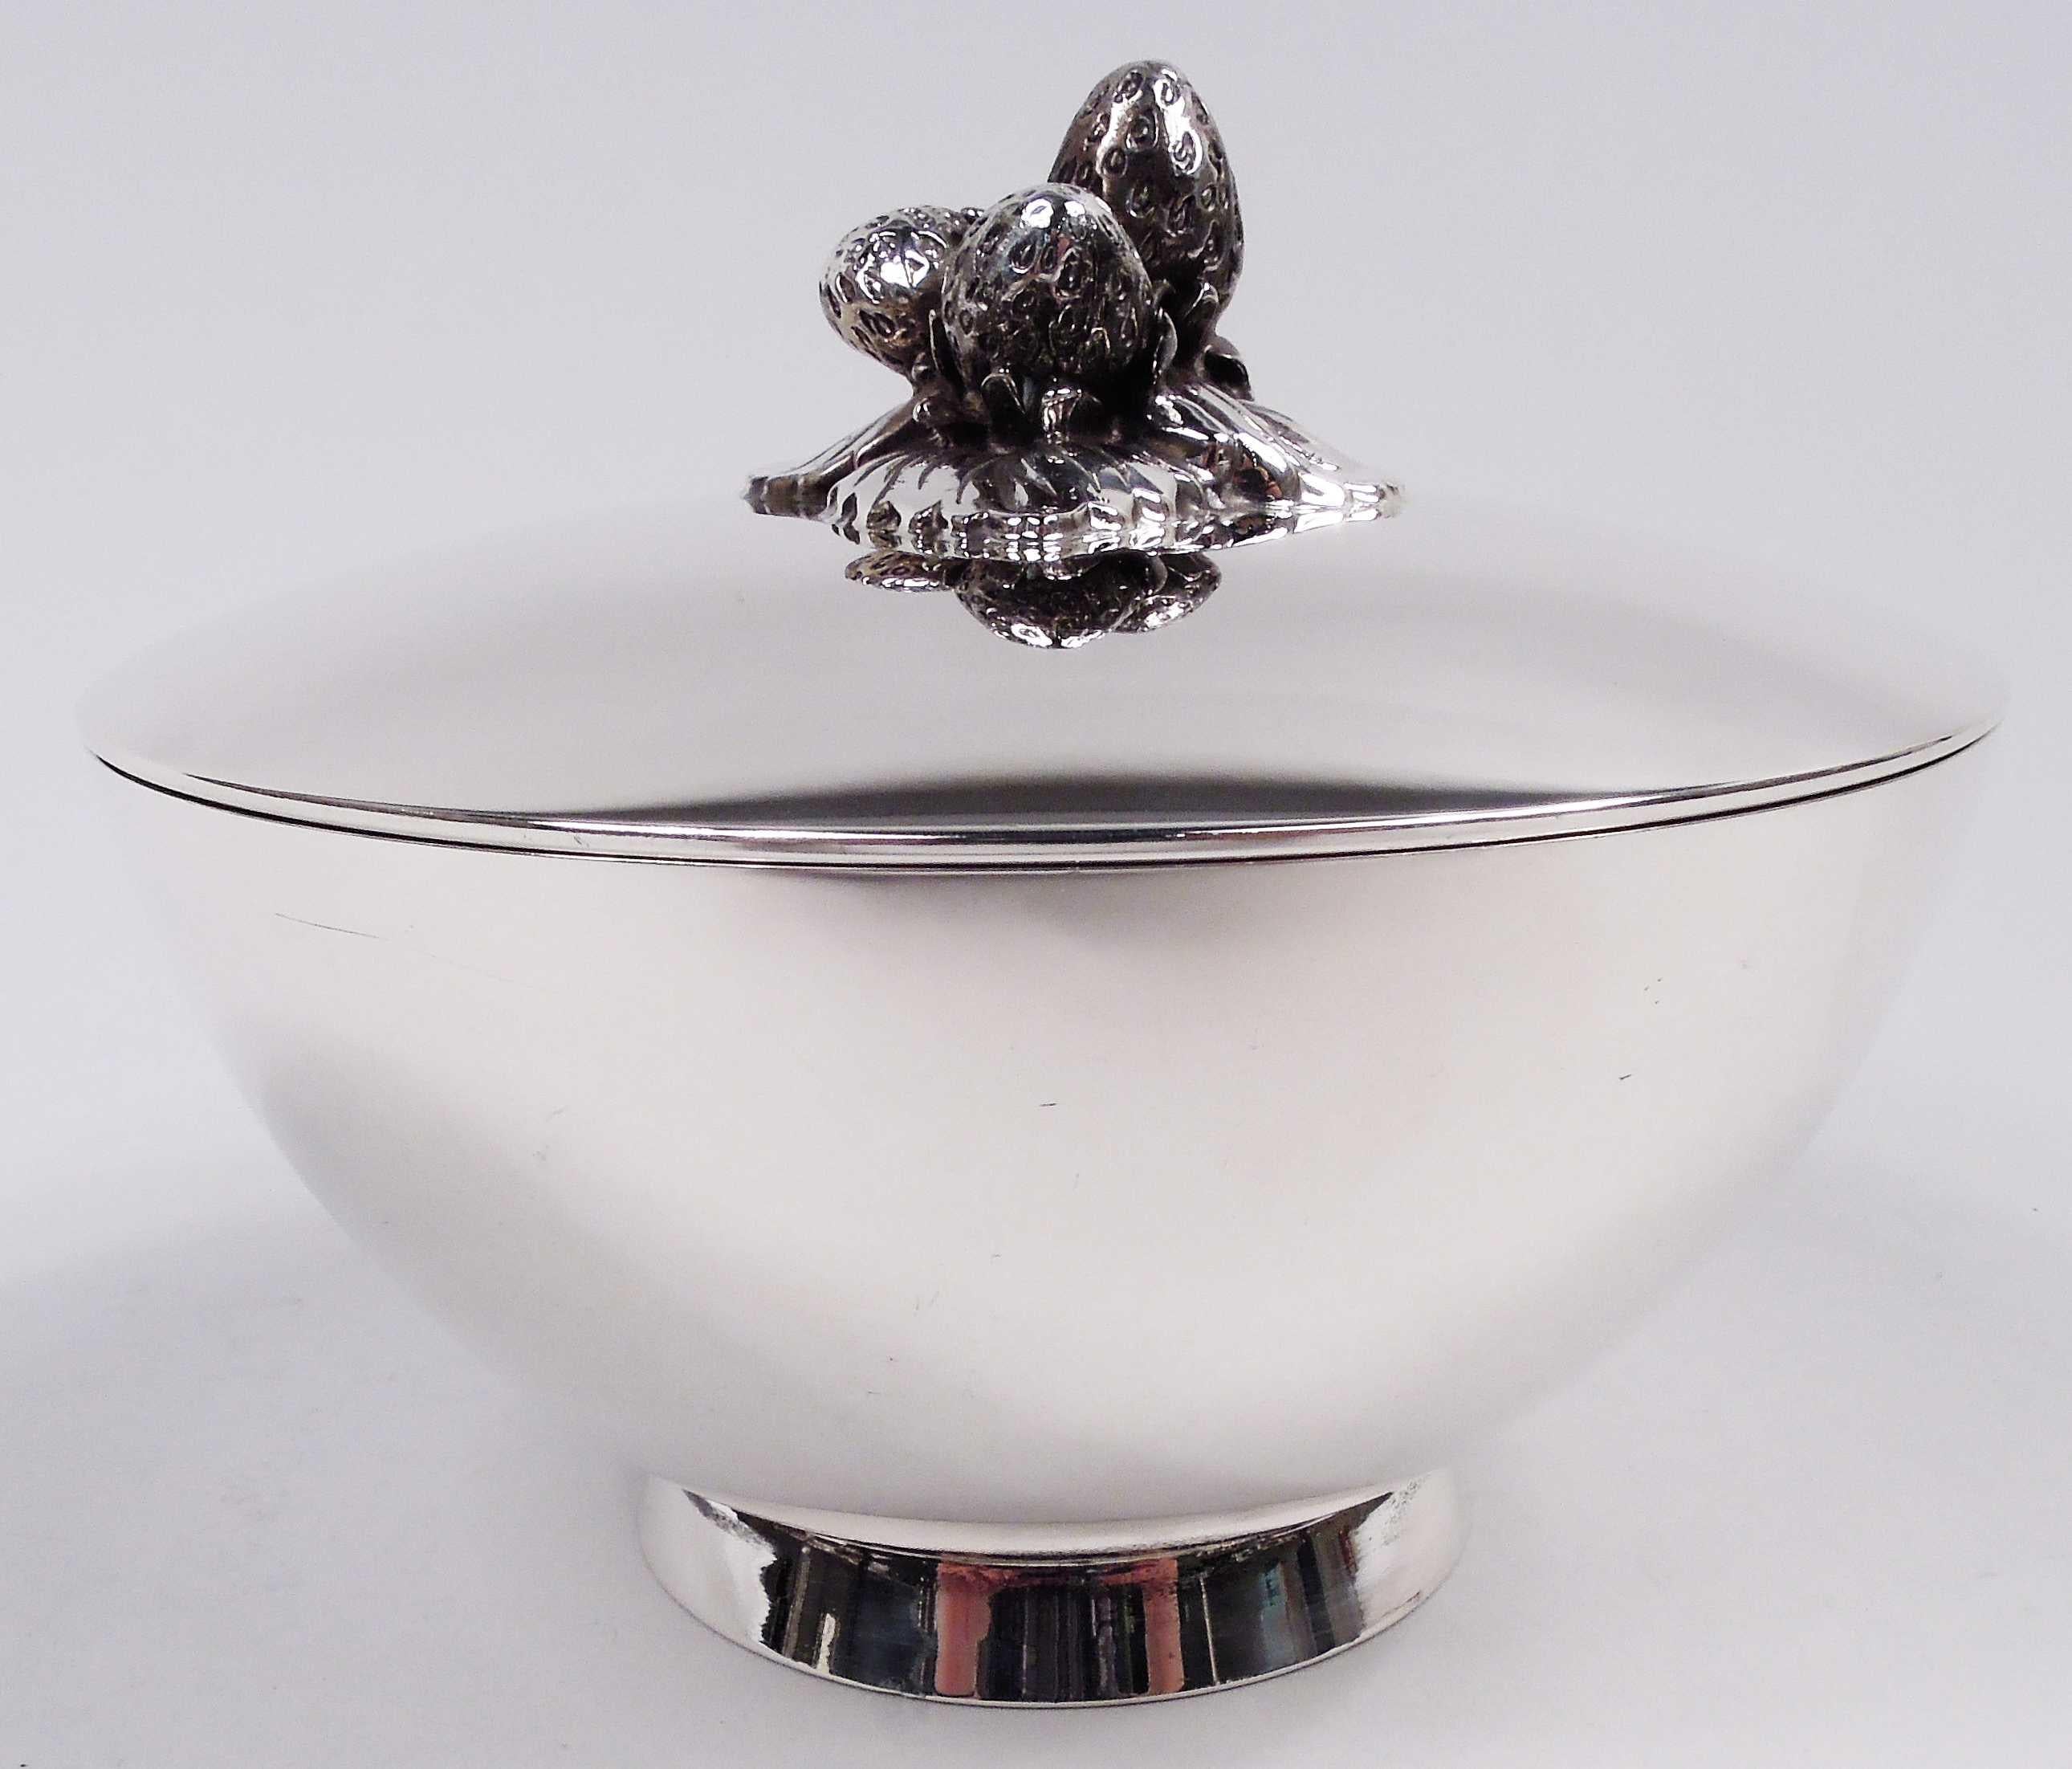 Midcentury Modern sterling silver bowl. Made by Tiffany & Co. in New York. Curved sides and splayed foot ring. Cover top gently curved and mounted with cast strawberry and leaf finial. Fully marked including maker’s stamp, postwar pattern no. 23923,